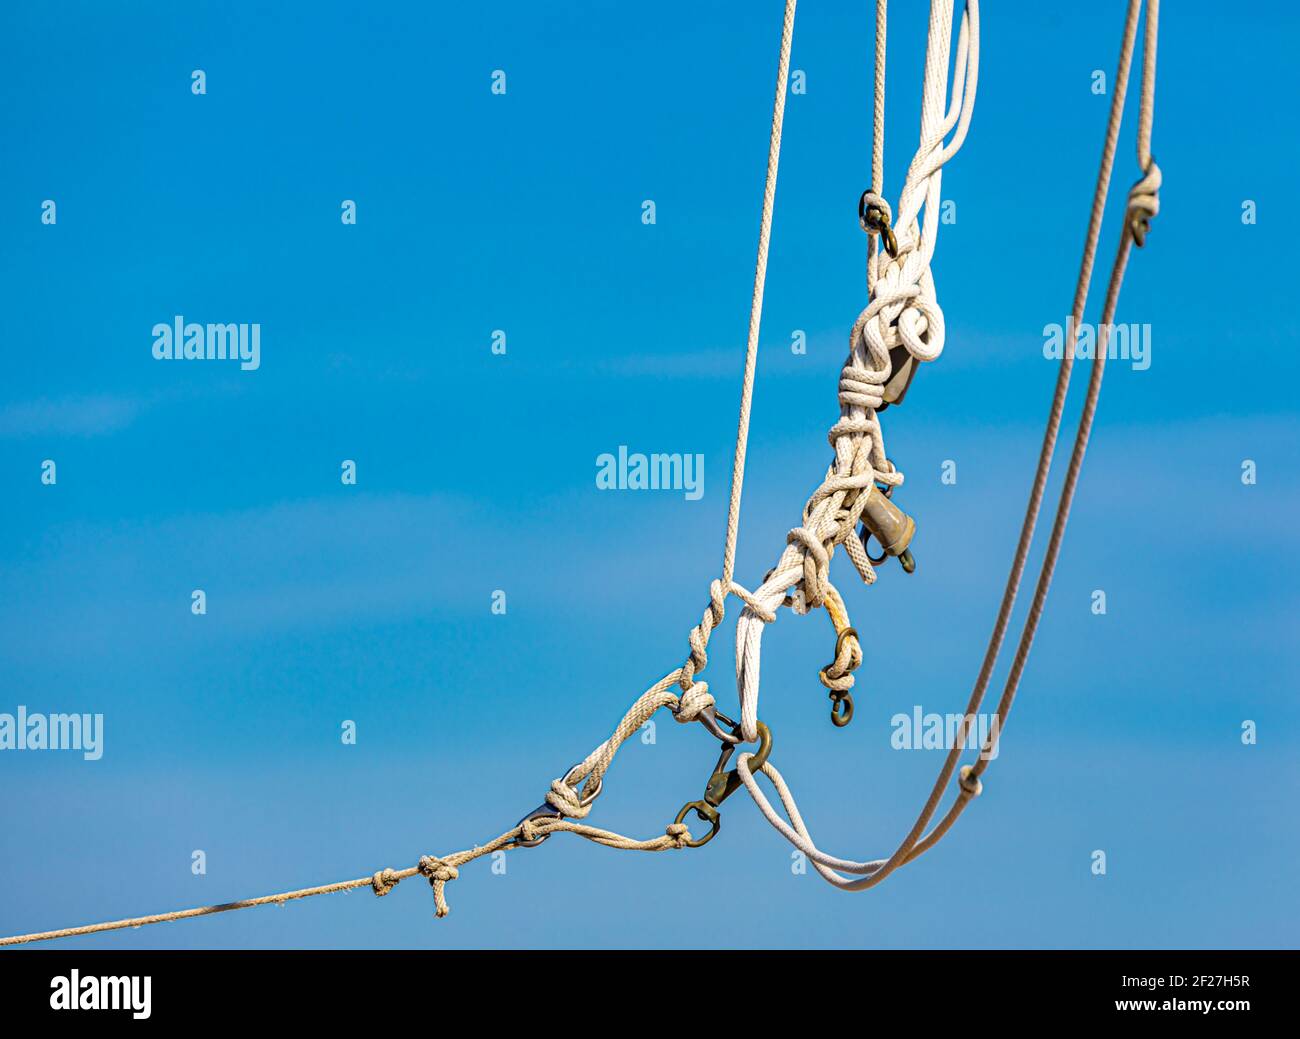 Tangled rope with a brilliant blue sky behind Stock Photo